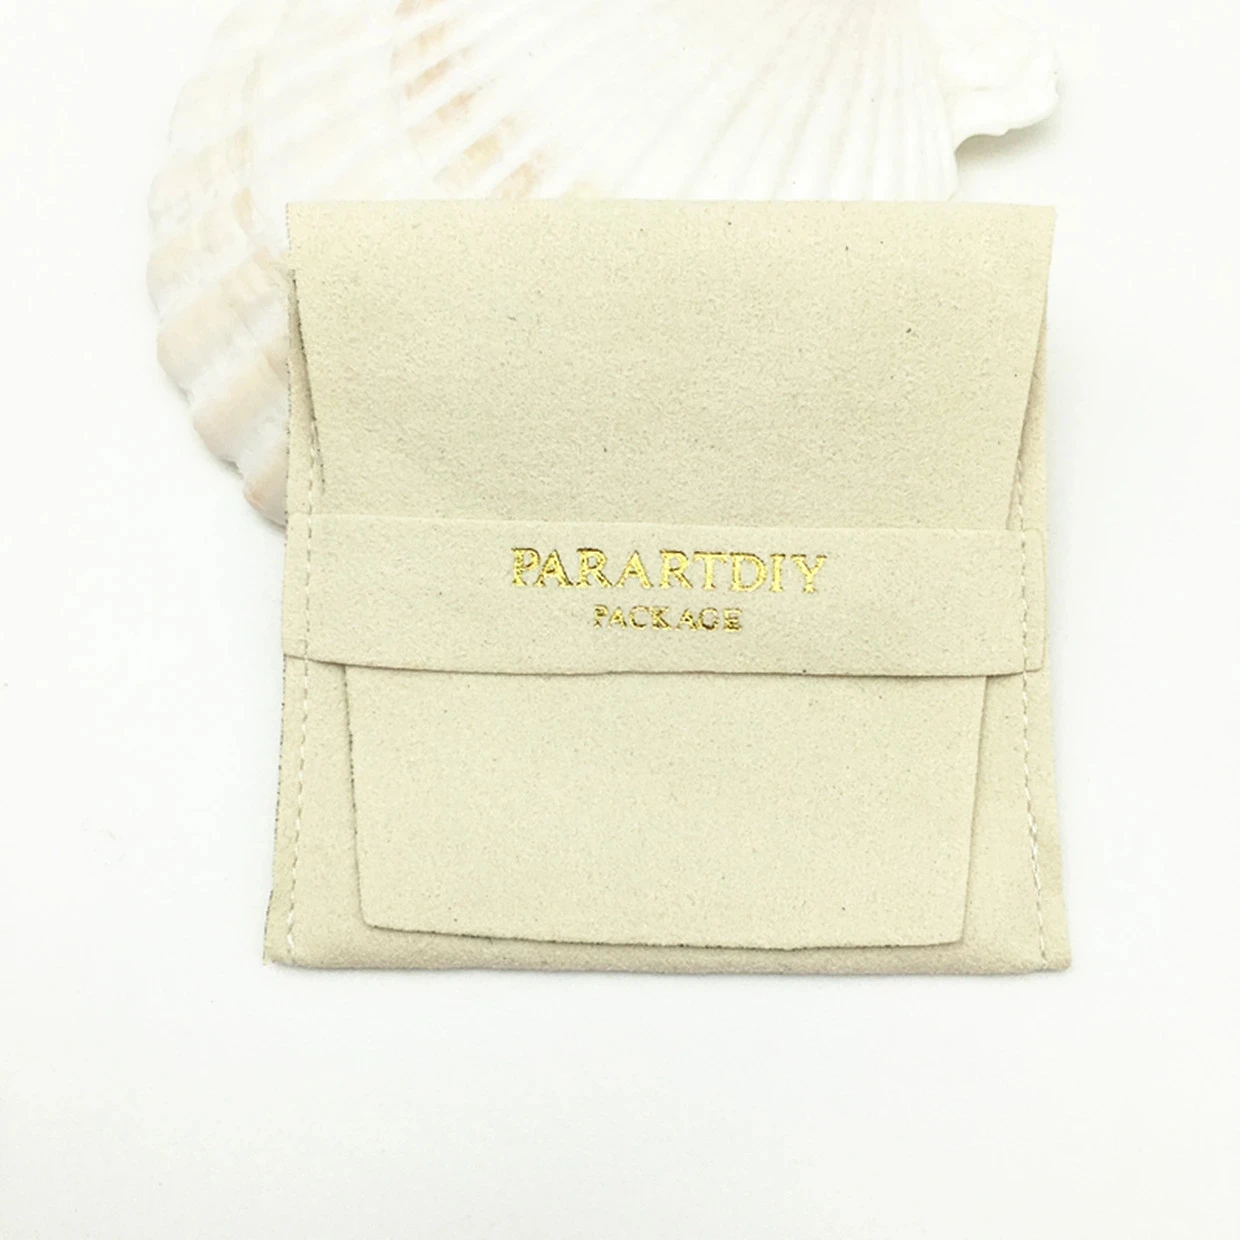 50pcs personalized cream debossed logo printed microfiber jewelry pouch bag ring brooch bag beading pouch off white bag suede